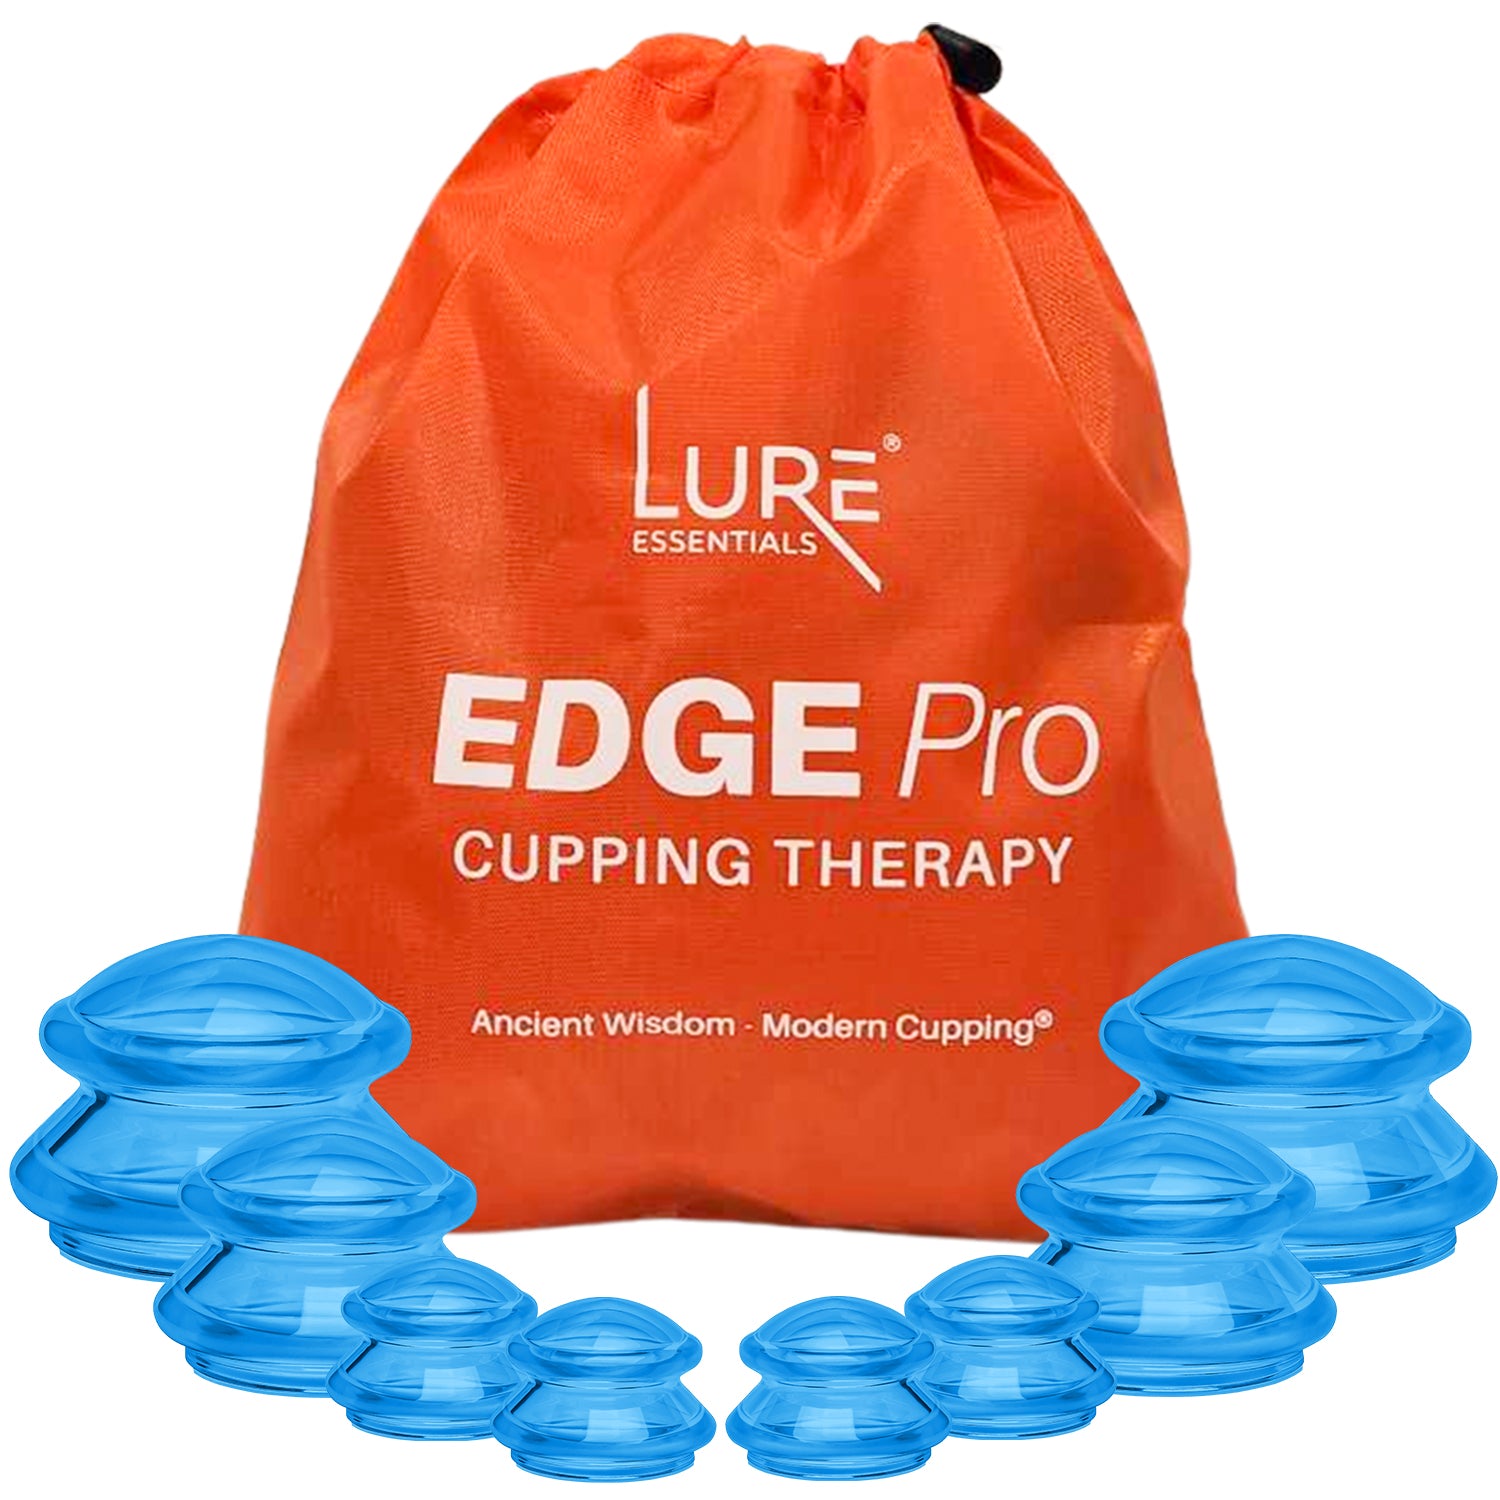 Cupping Sets - Lure Essentials